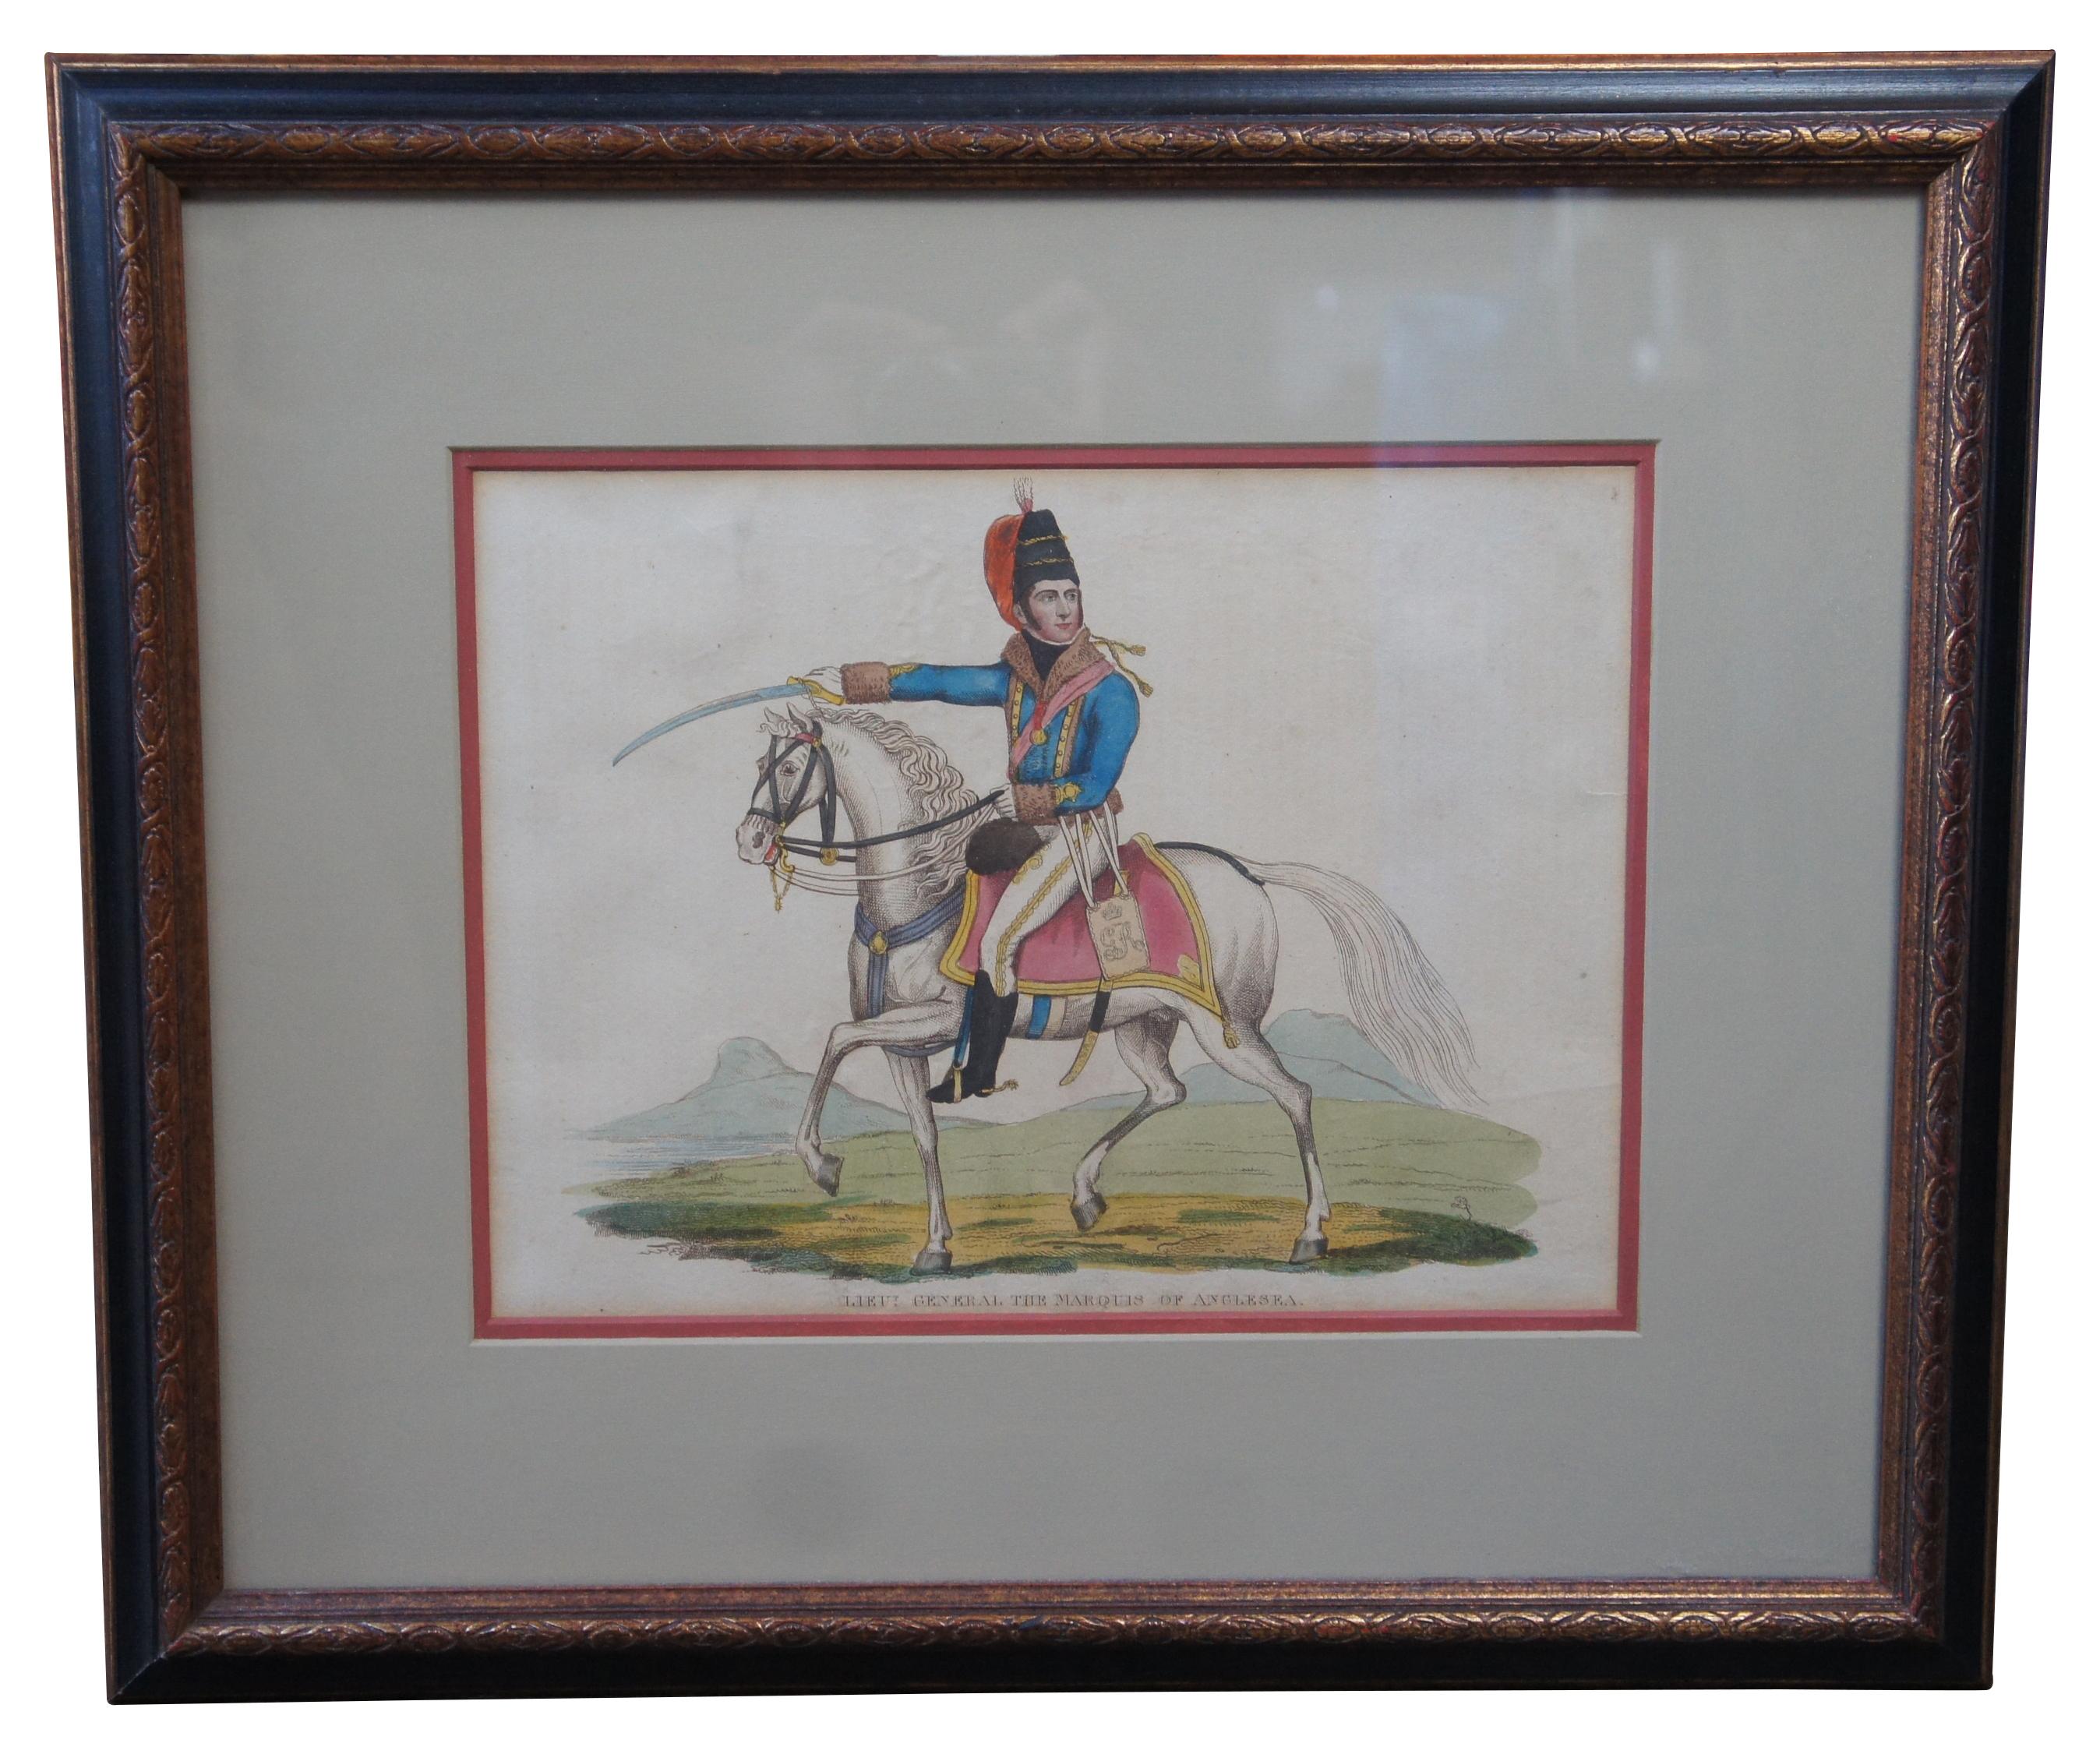 Two antique Richard Evans hand colored equestrian officer engravings featuring Lieut General Henry William Paget and Field Marshal Von Blucher. Both dressed in official attire with outstretched swords and white horses. circa 1815.

Nicholson's